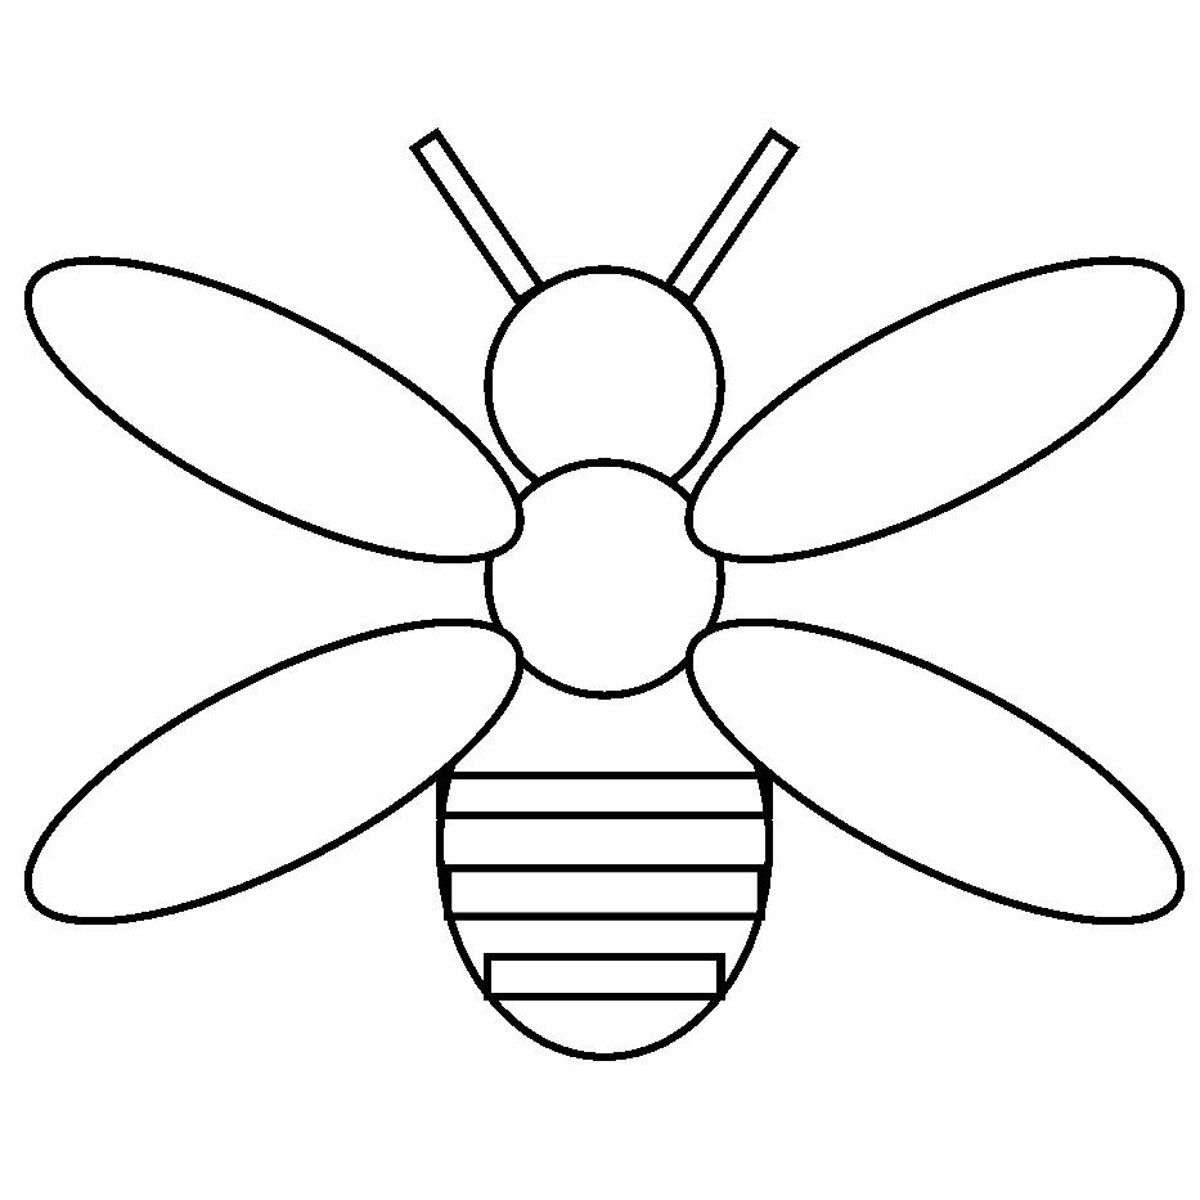 Lightning Bug Coloring Pages   Coloring Pages   Pictures   Imagixs